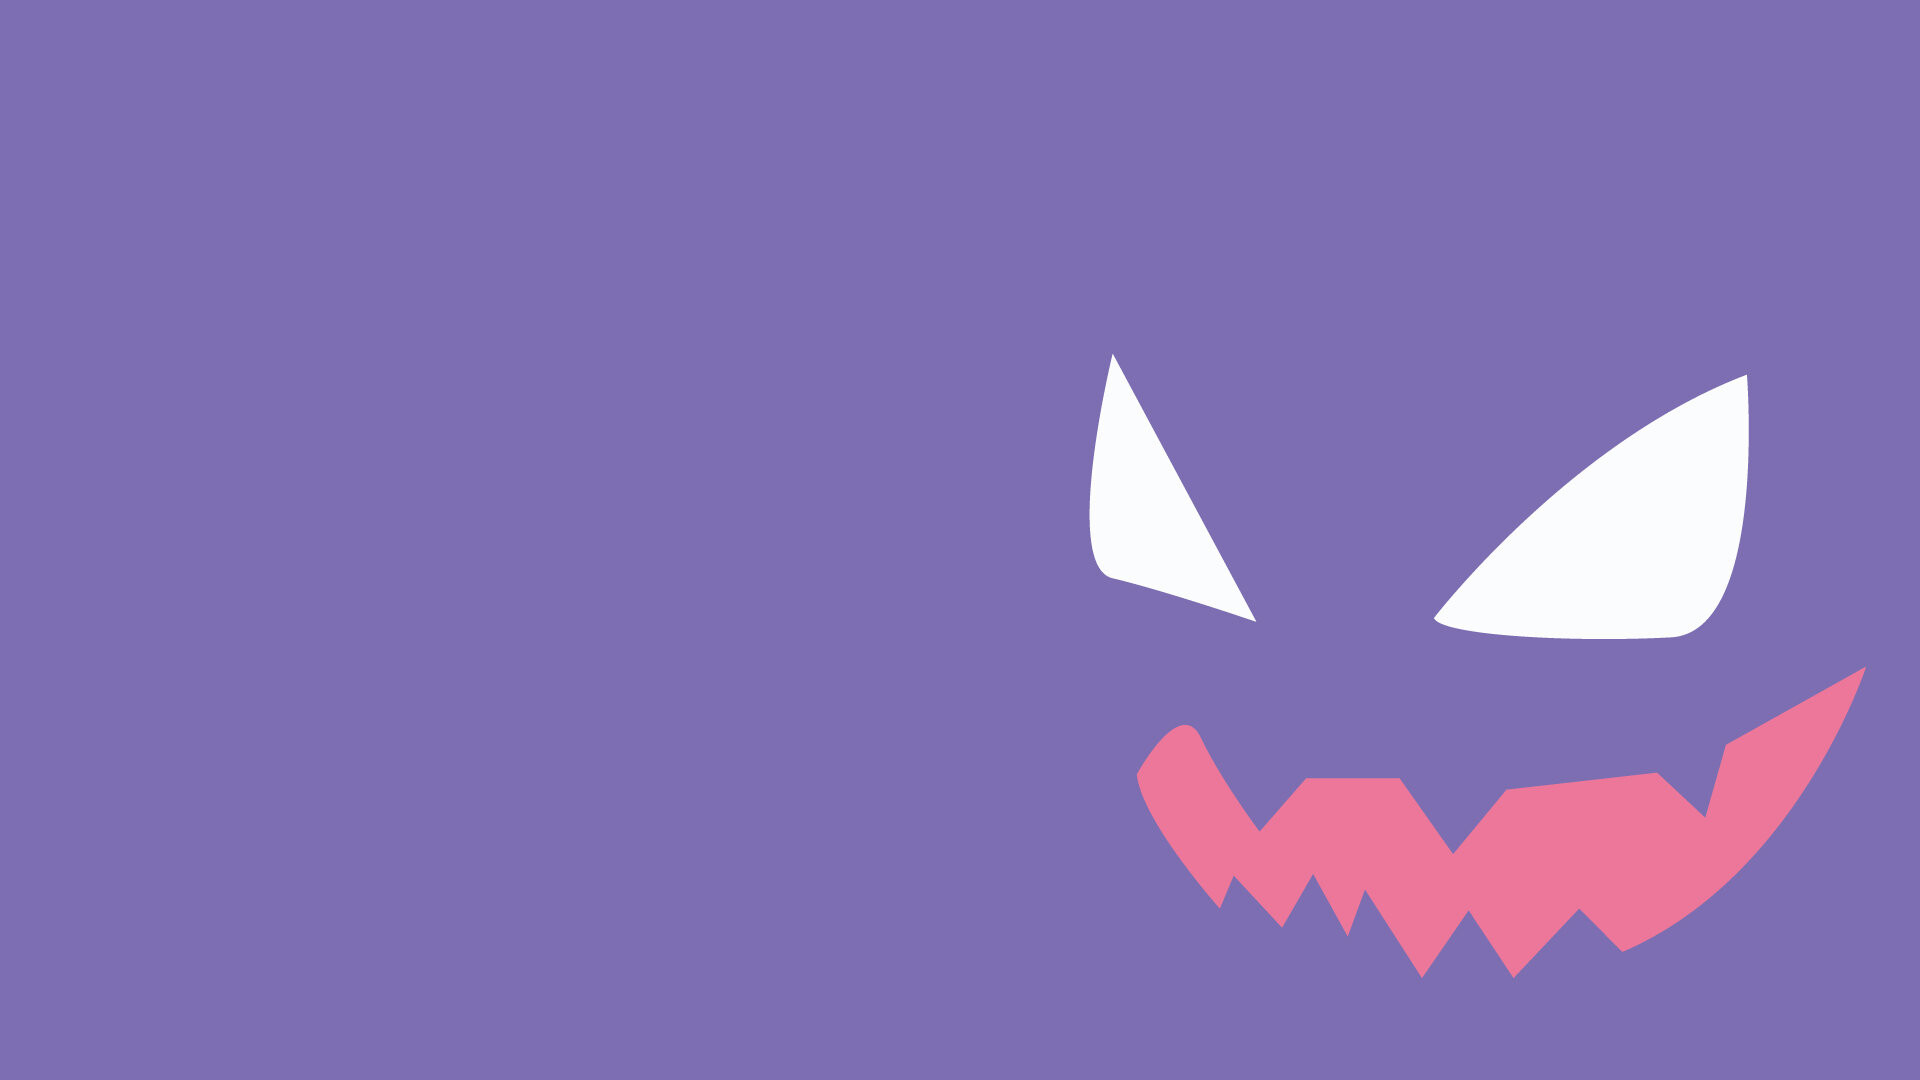 Gengar: Sinister smile, Minimalistic, Mischievous, Triangular eyes without pupils. 1920x1080 Full HD Wallpaper.